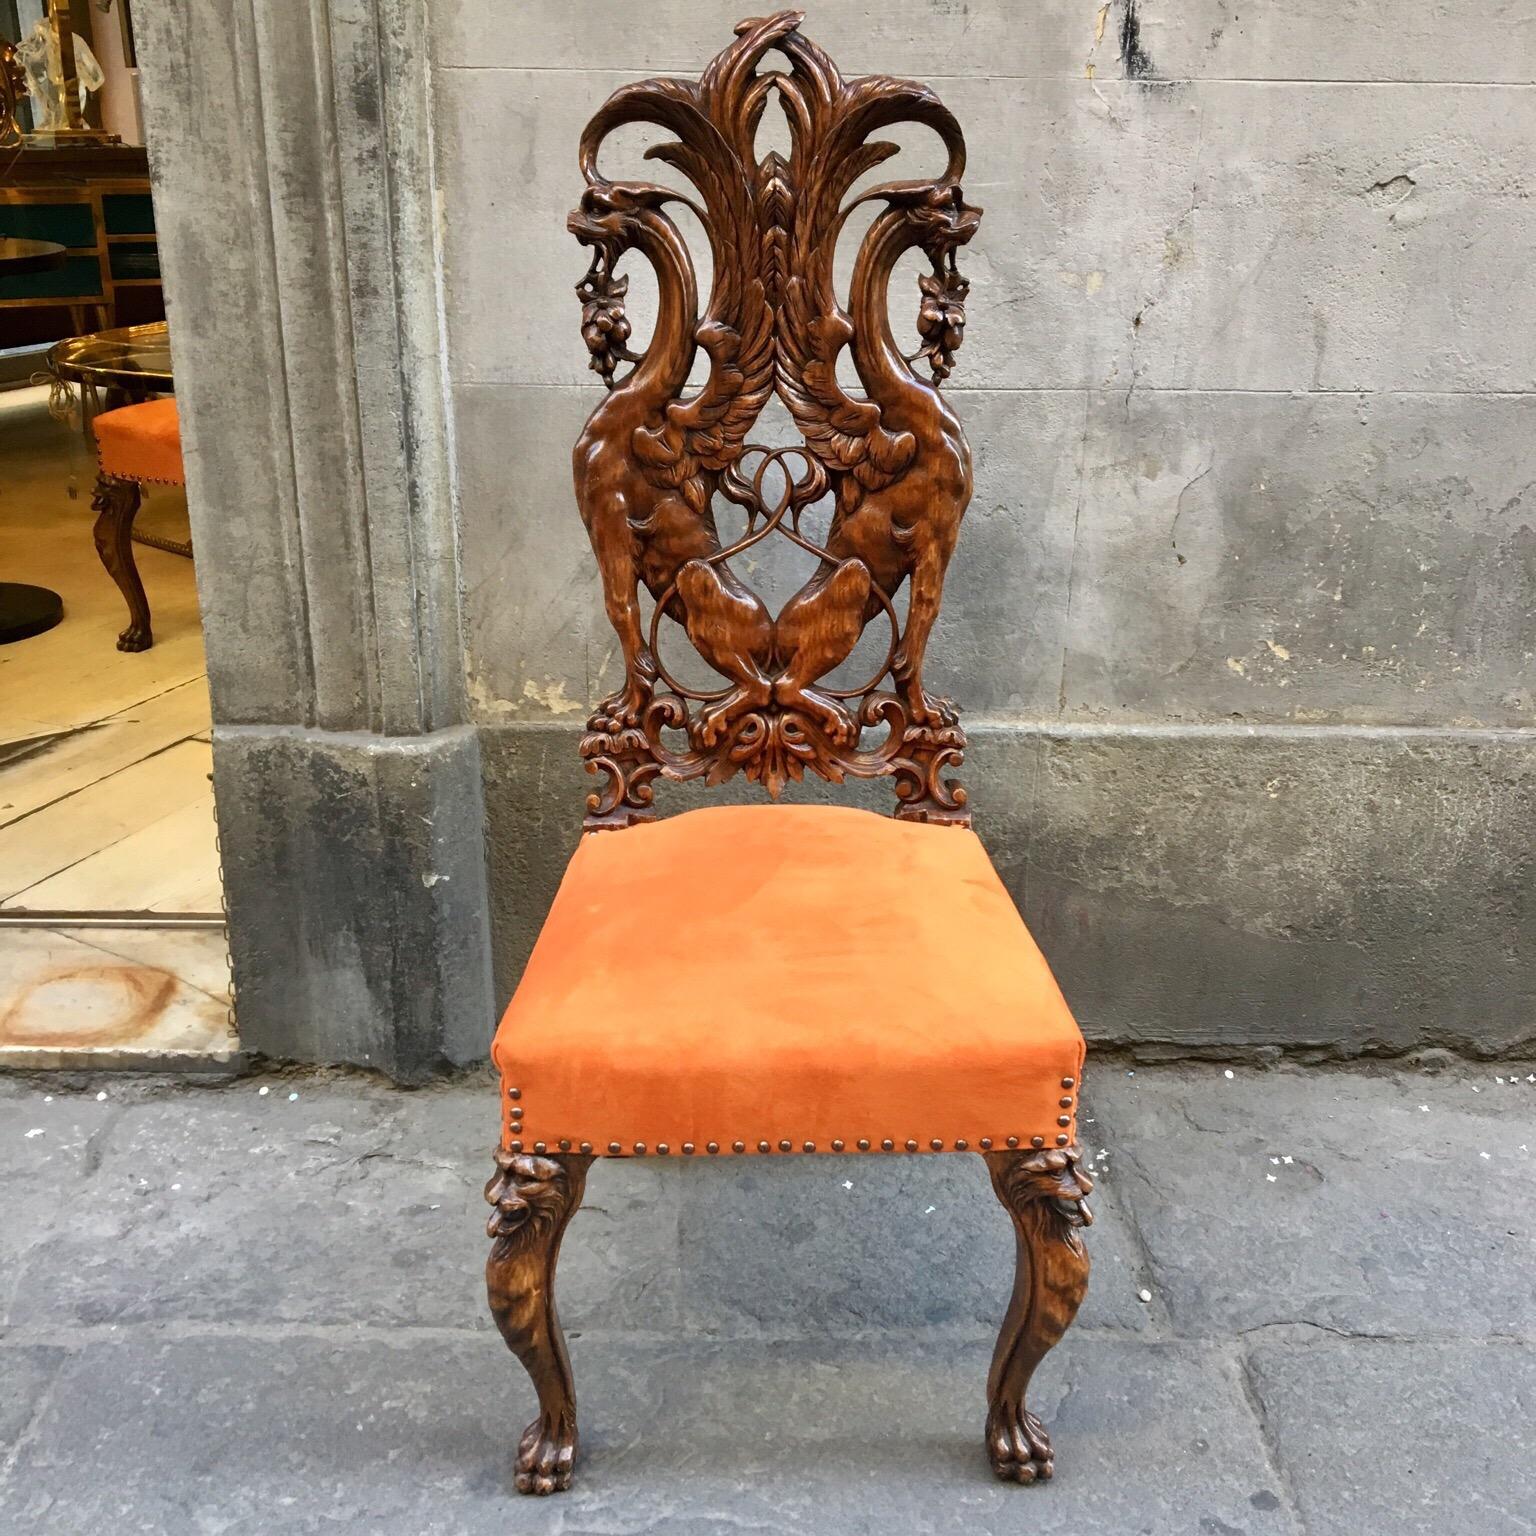 Italian Pair of Carved Renaissance-Style Wooden Chairs Orange Alcantara Seat, Early 1900